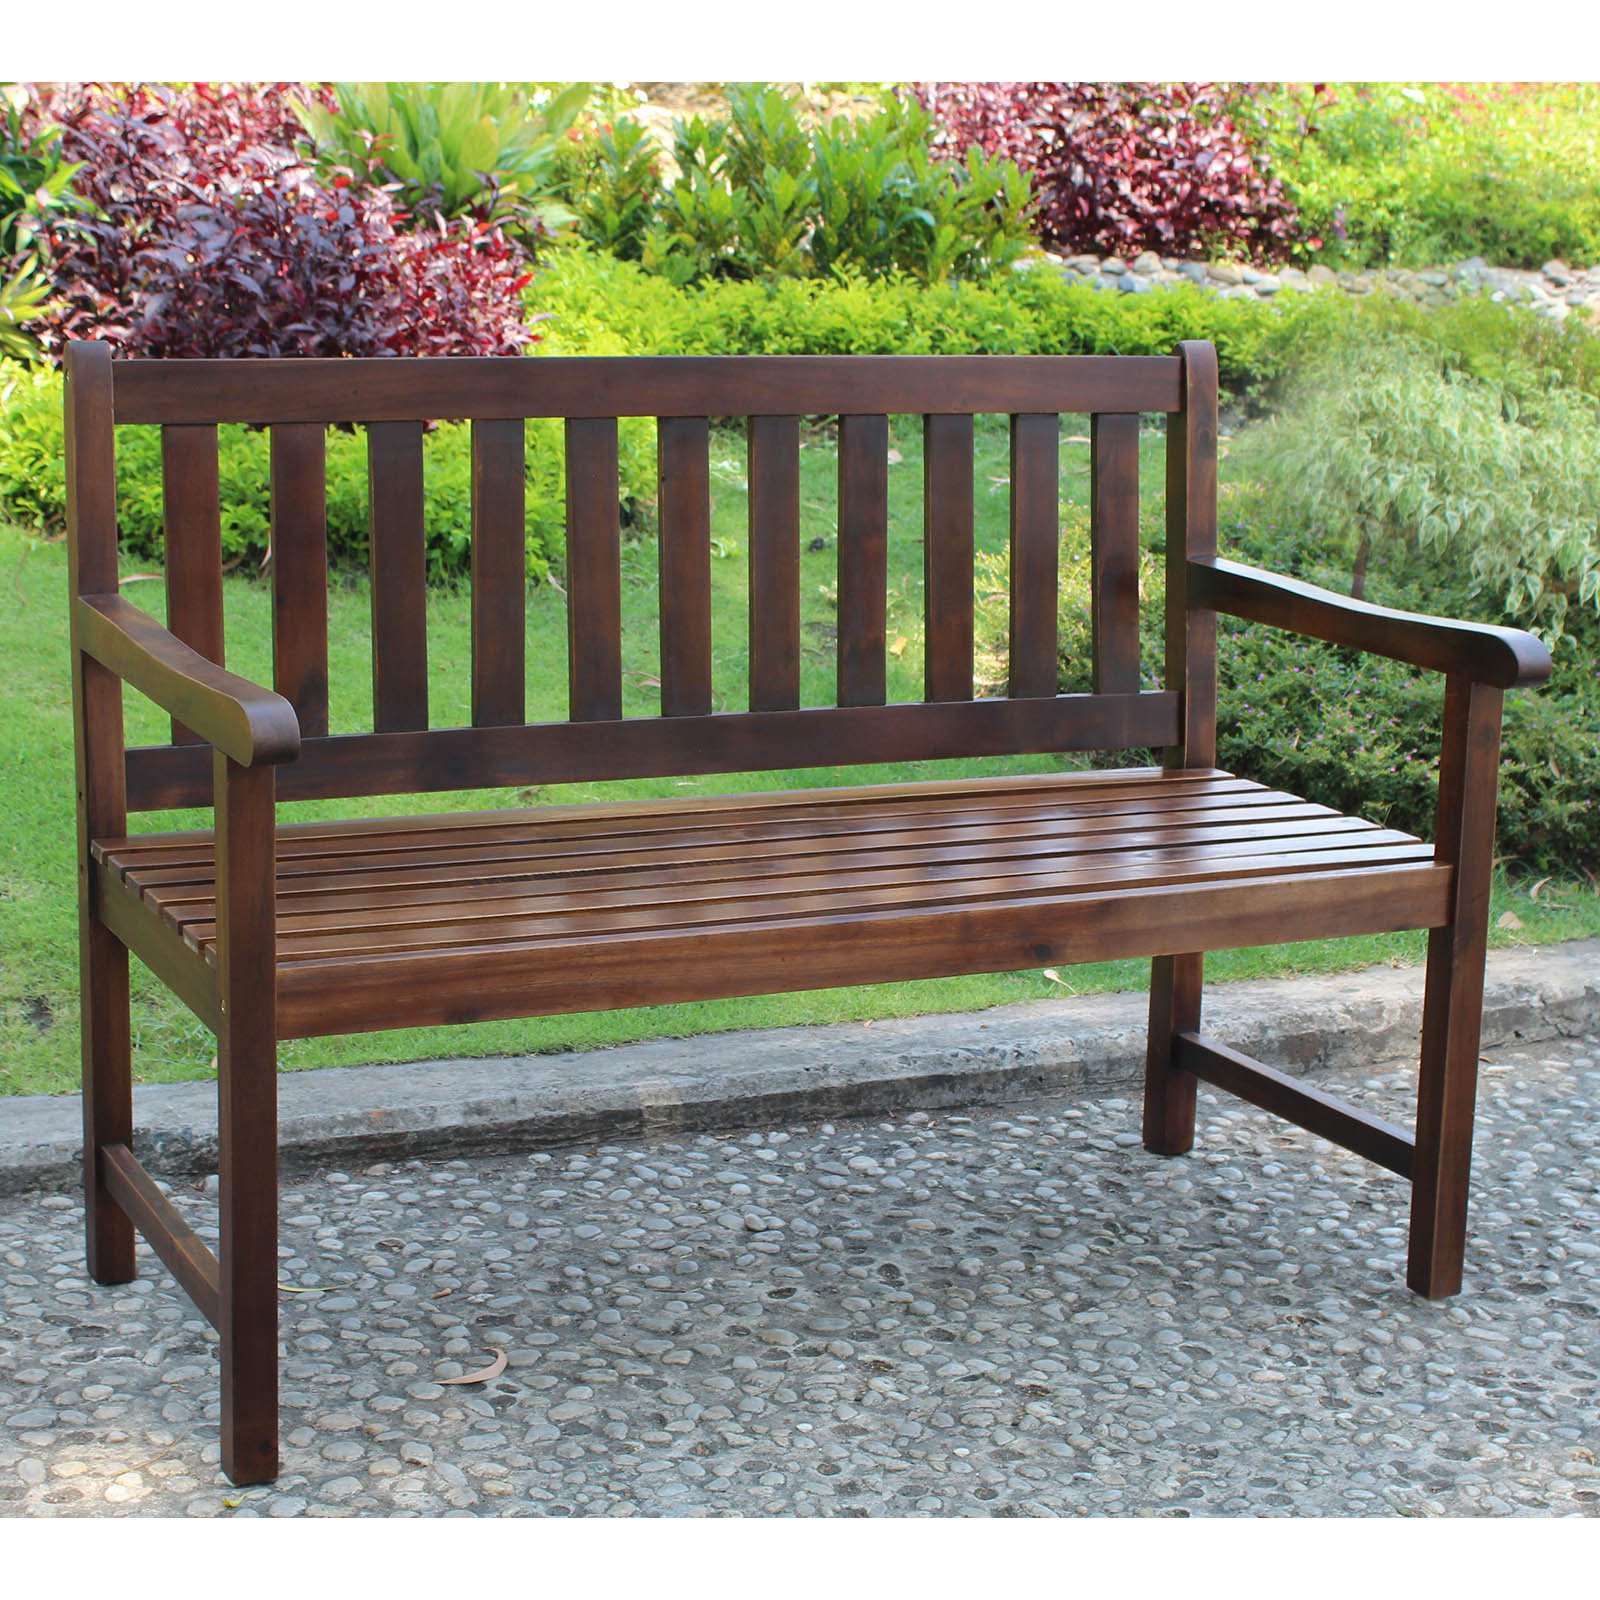 International Caravan Highland Acacia Stain 48.25 in. Patio Park Bench - image 1 of 3